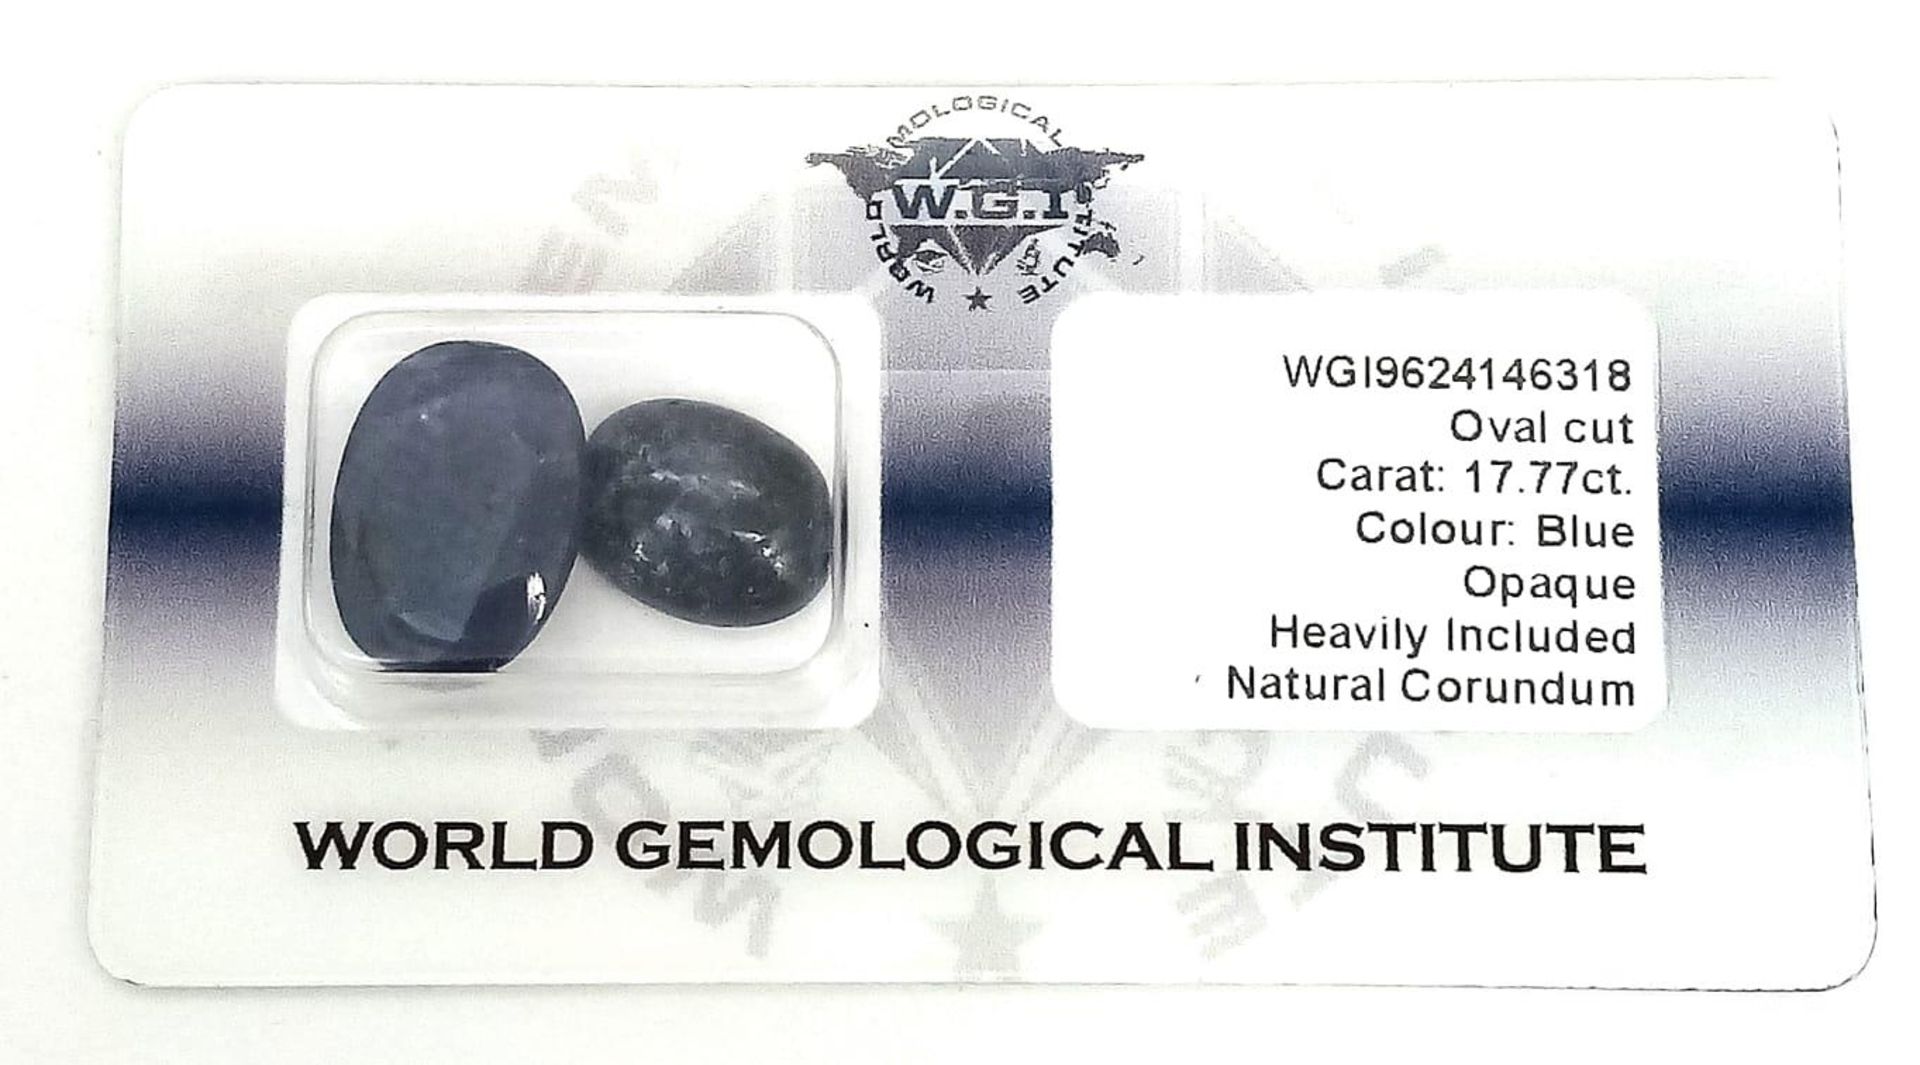 17.77ct of Natural Corundum. Two pieces - oval cut. Comes with a WGI certificate. - Bild 2 aus 4